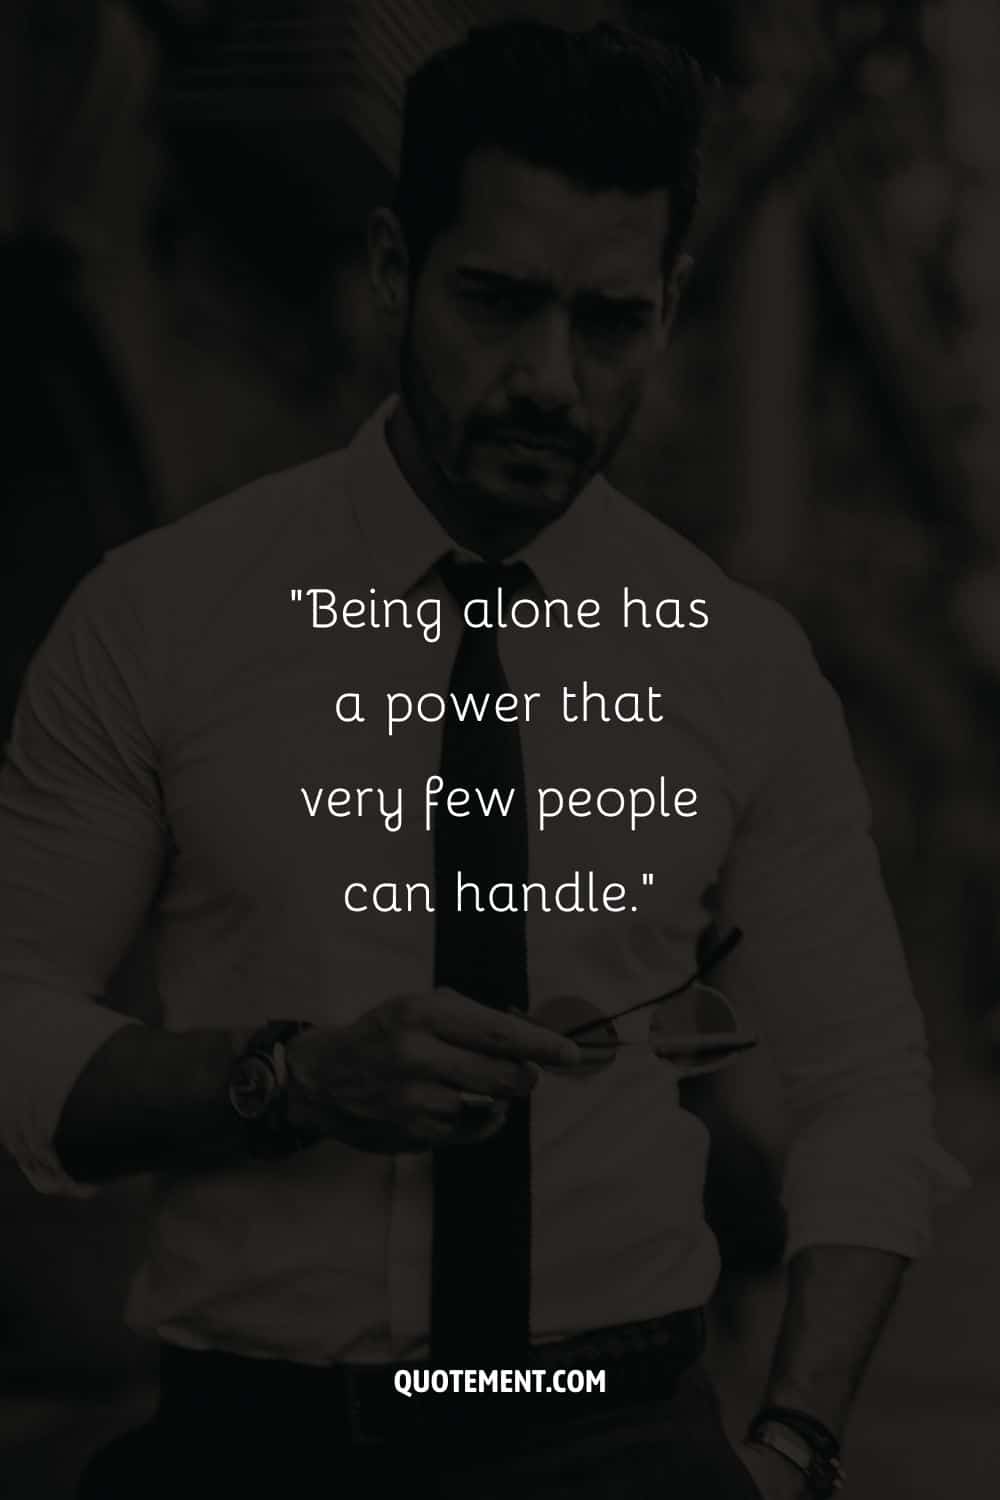 “Being alone has a power that very few people can handle.” 